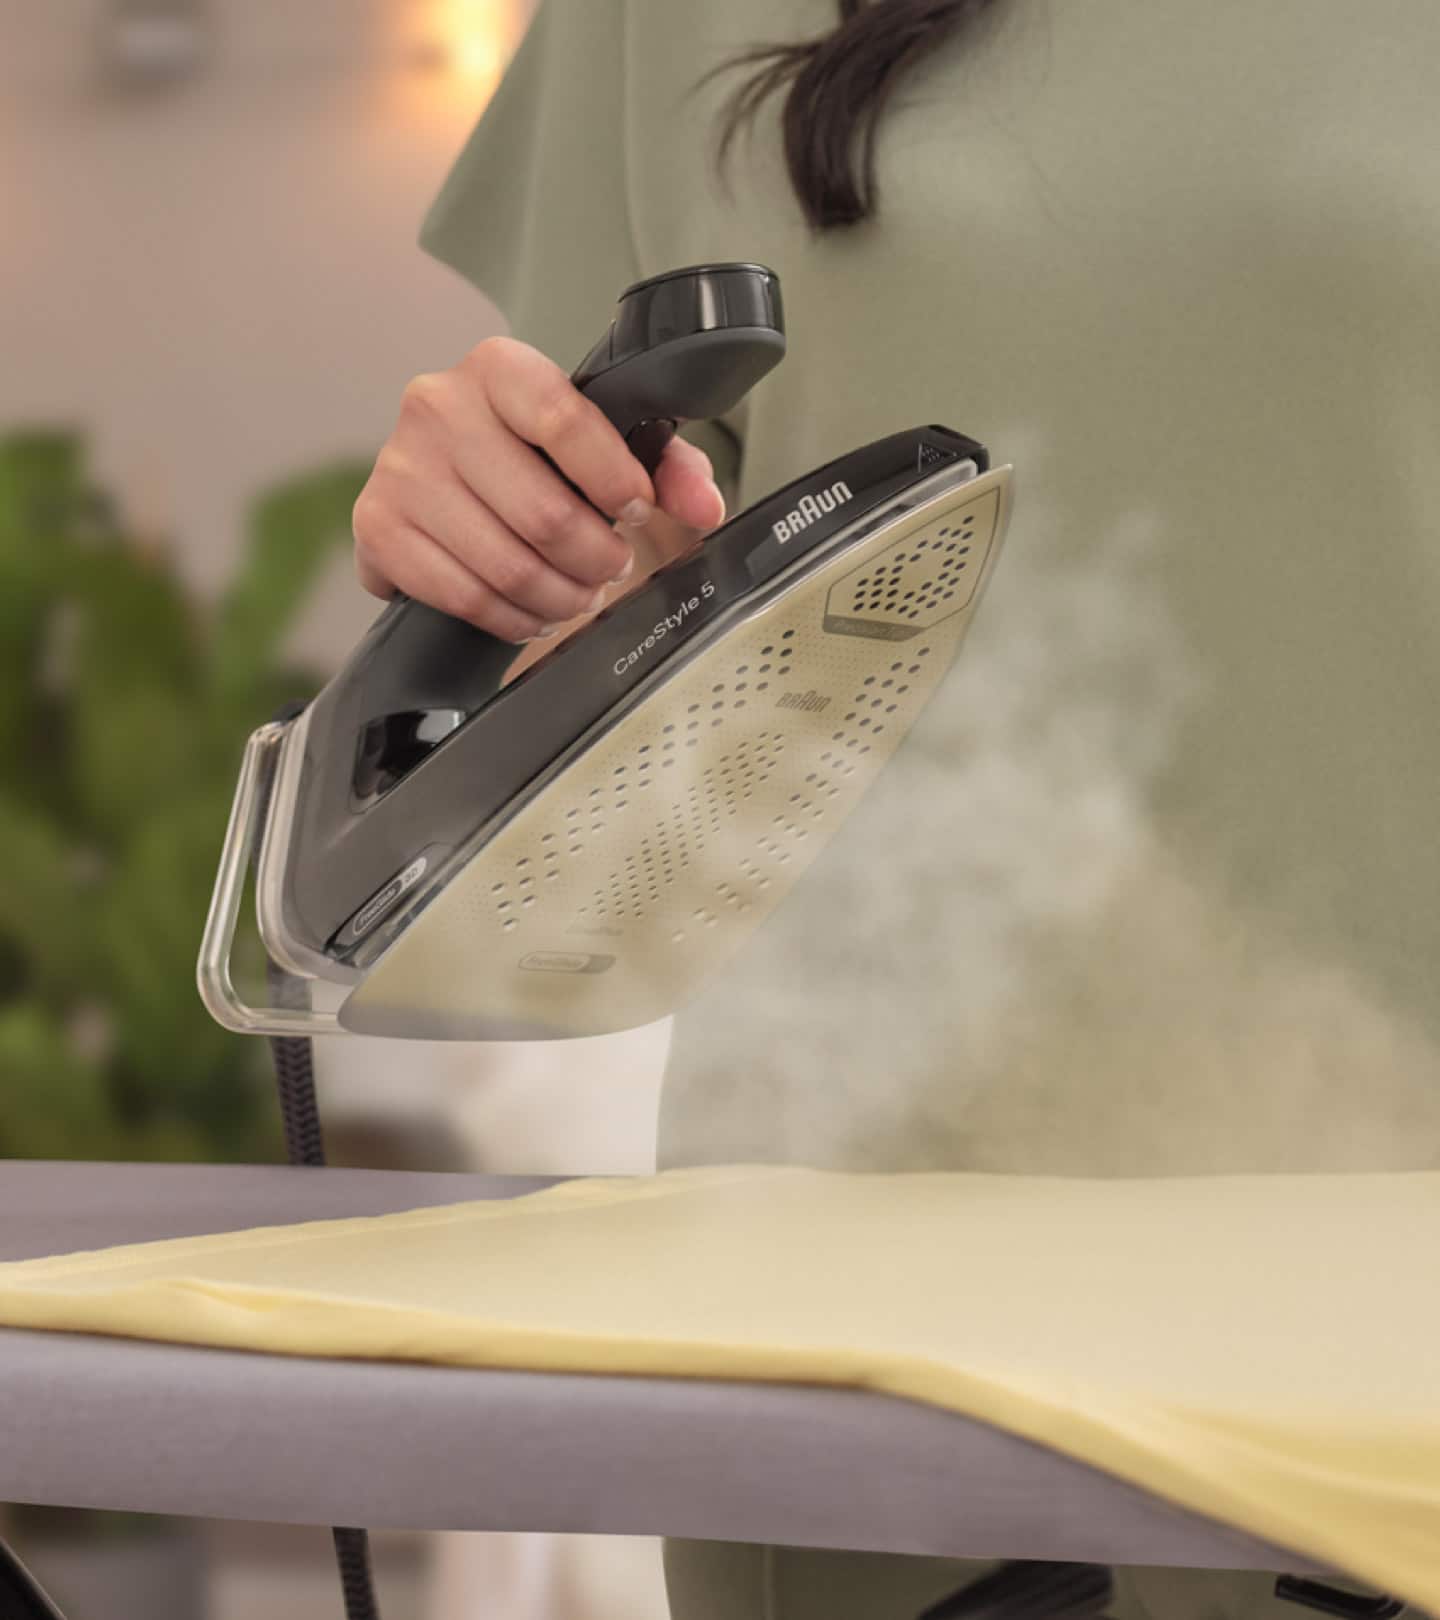 Braun CareStyle 5 Steam generating iron, black, in use with visible steam.